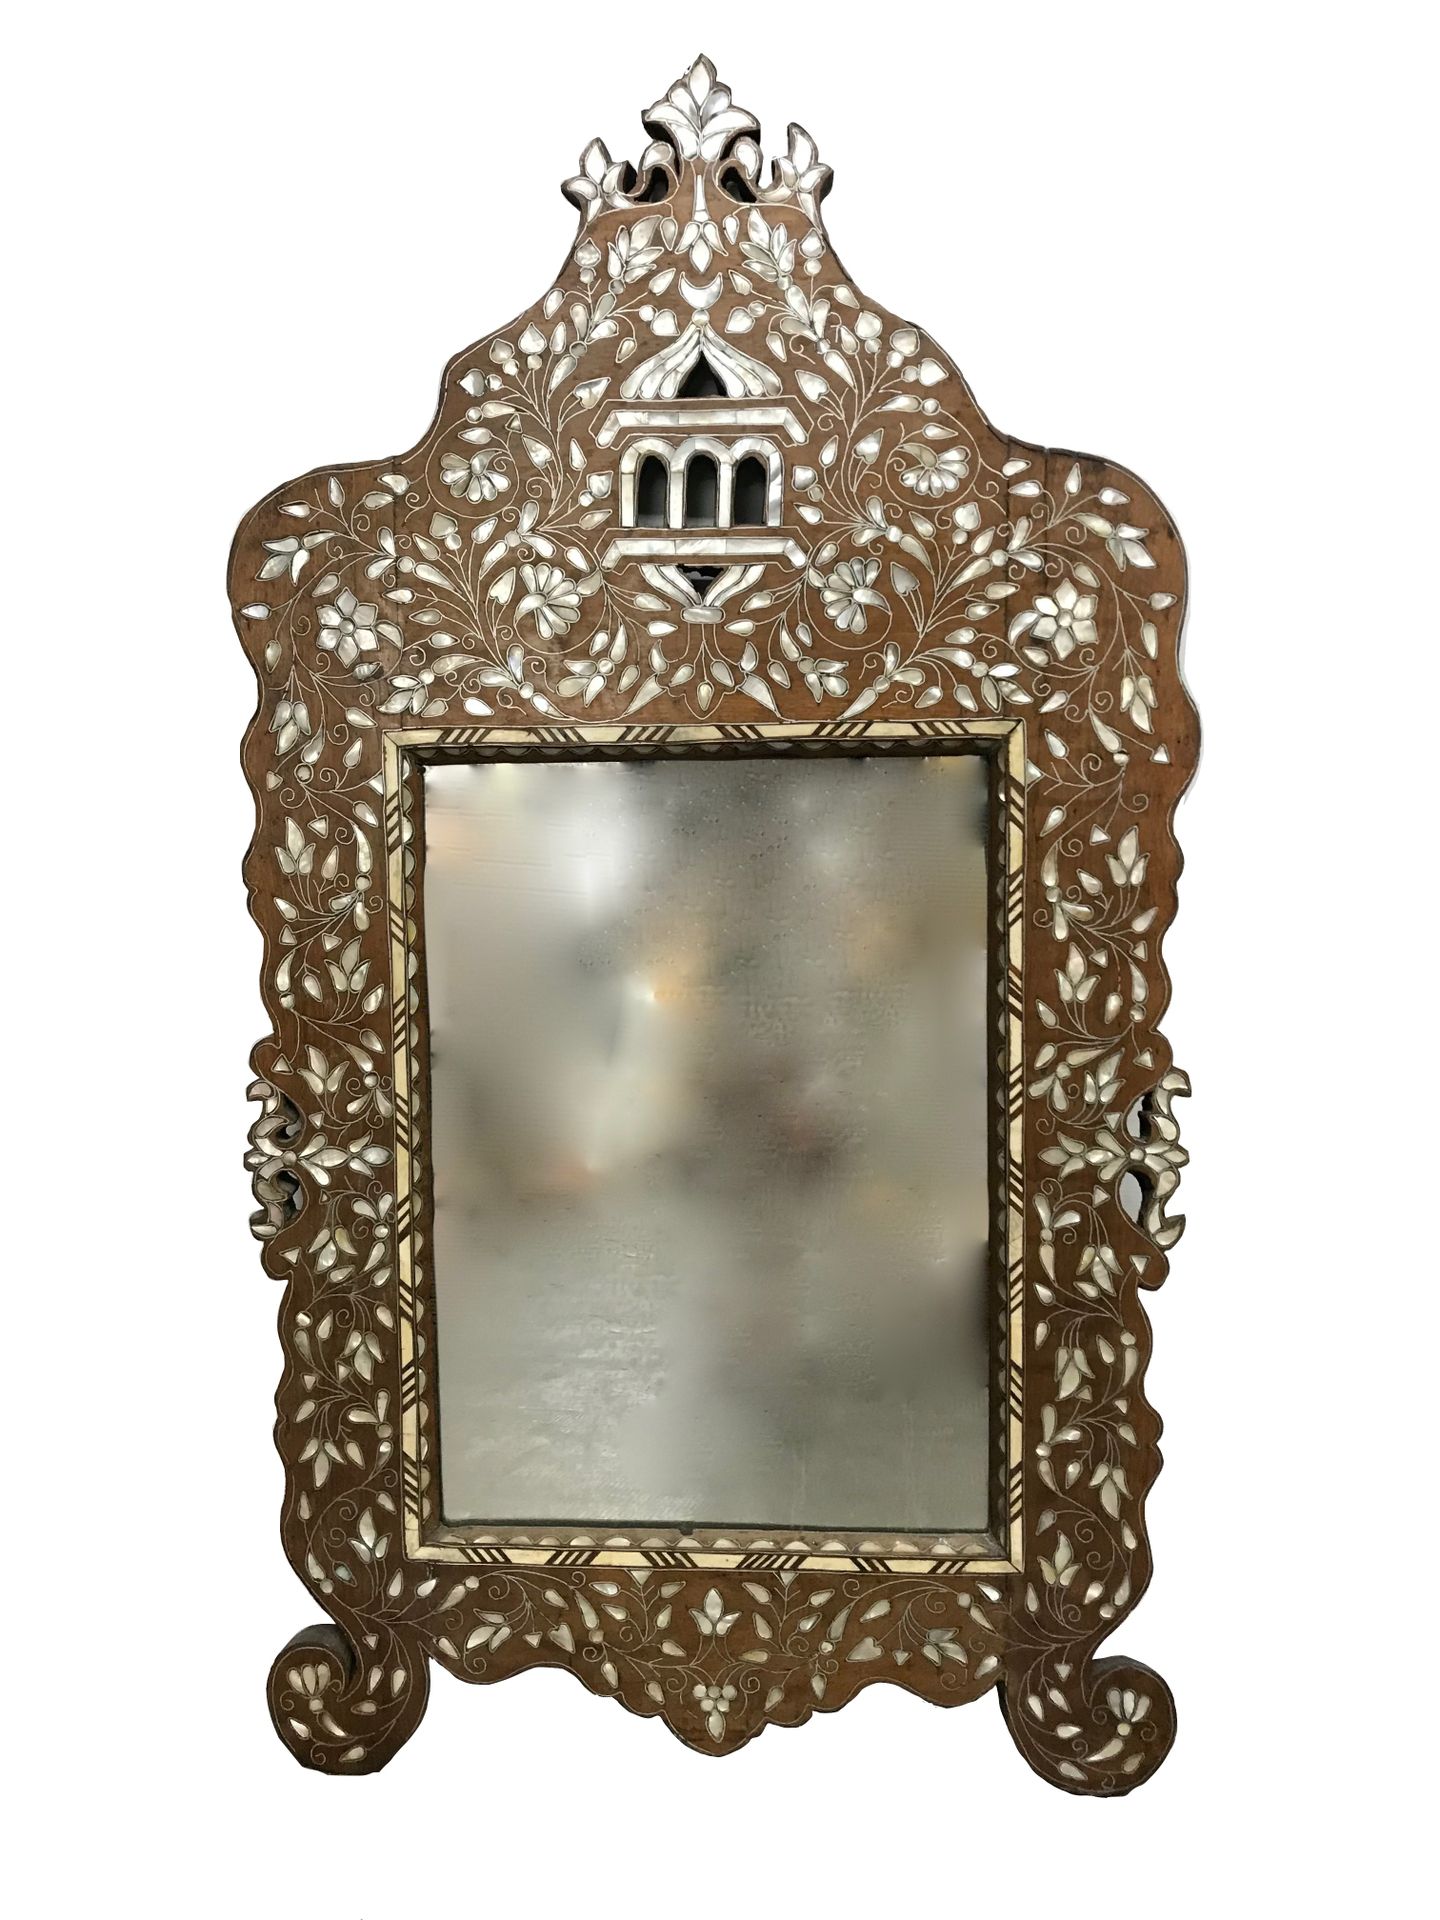 IRAN Mirror with mother-of-pearl inlays

H. 114 cm - W. 62 cm